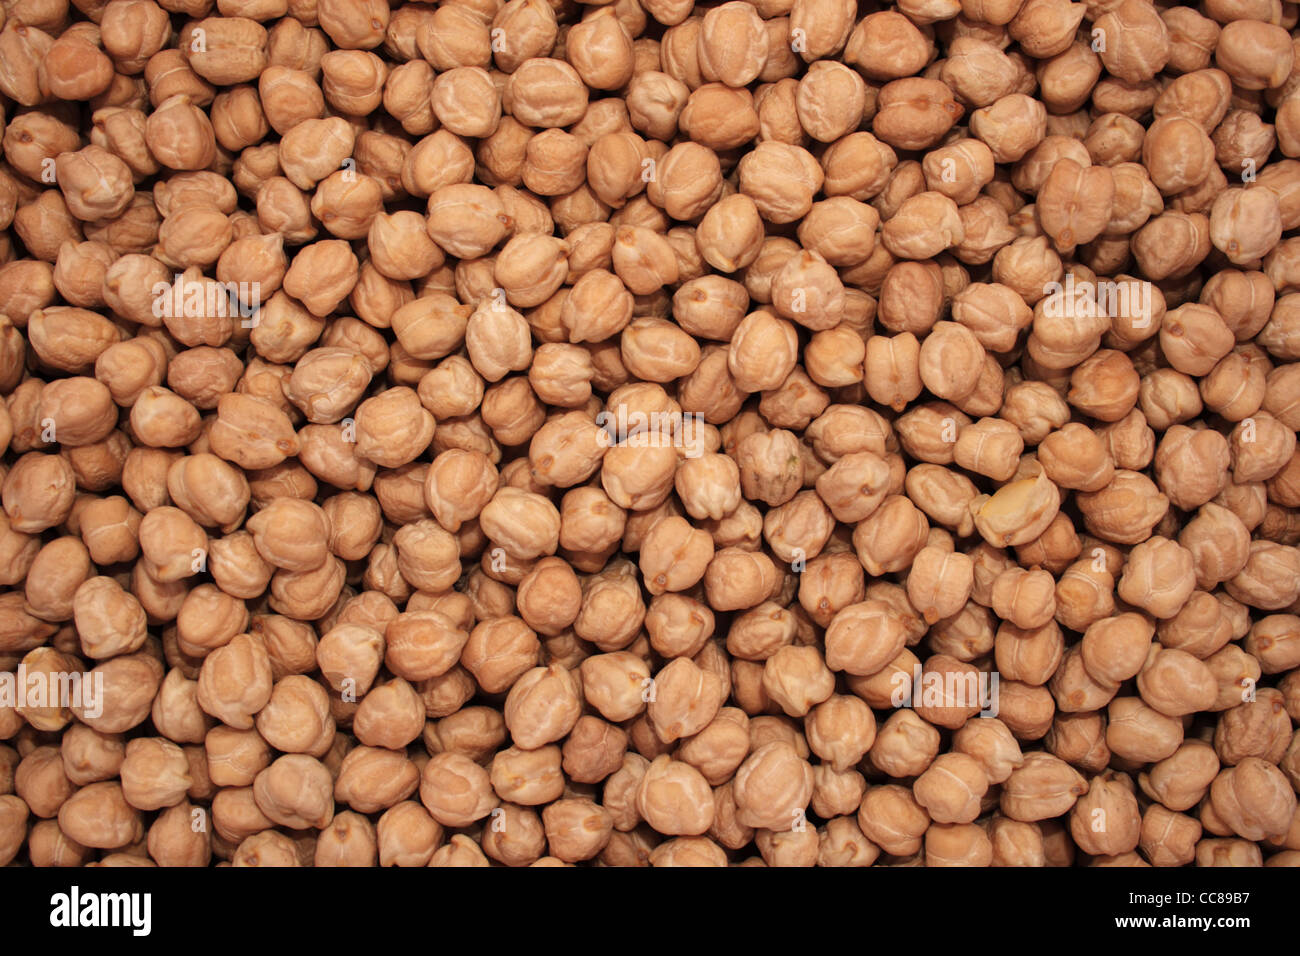 dried chickpea or garbanzo bean background Stock Photo